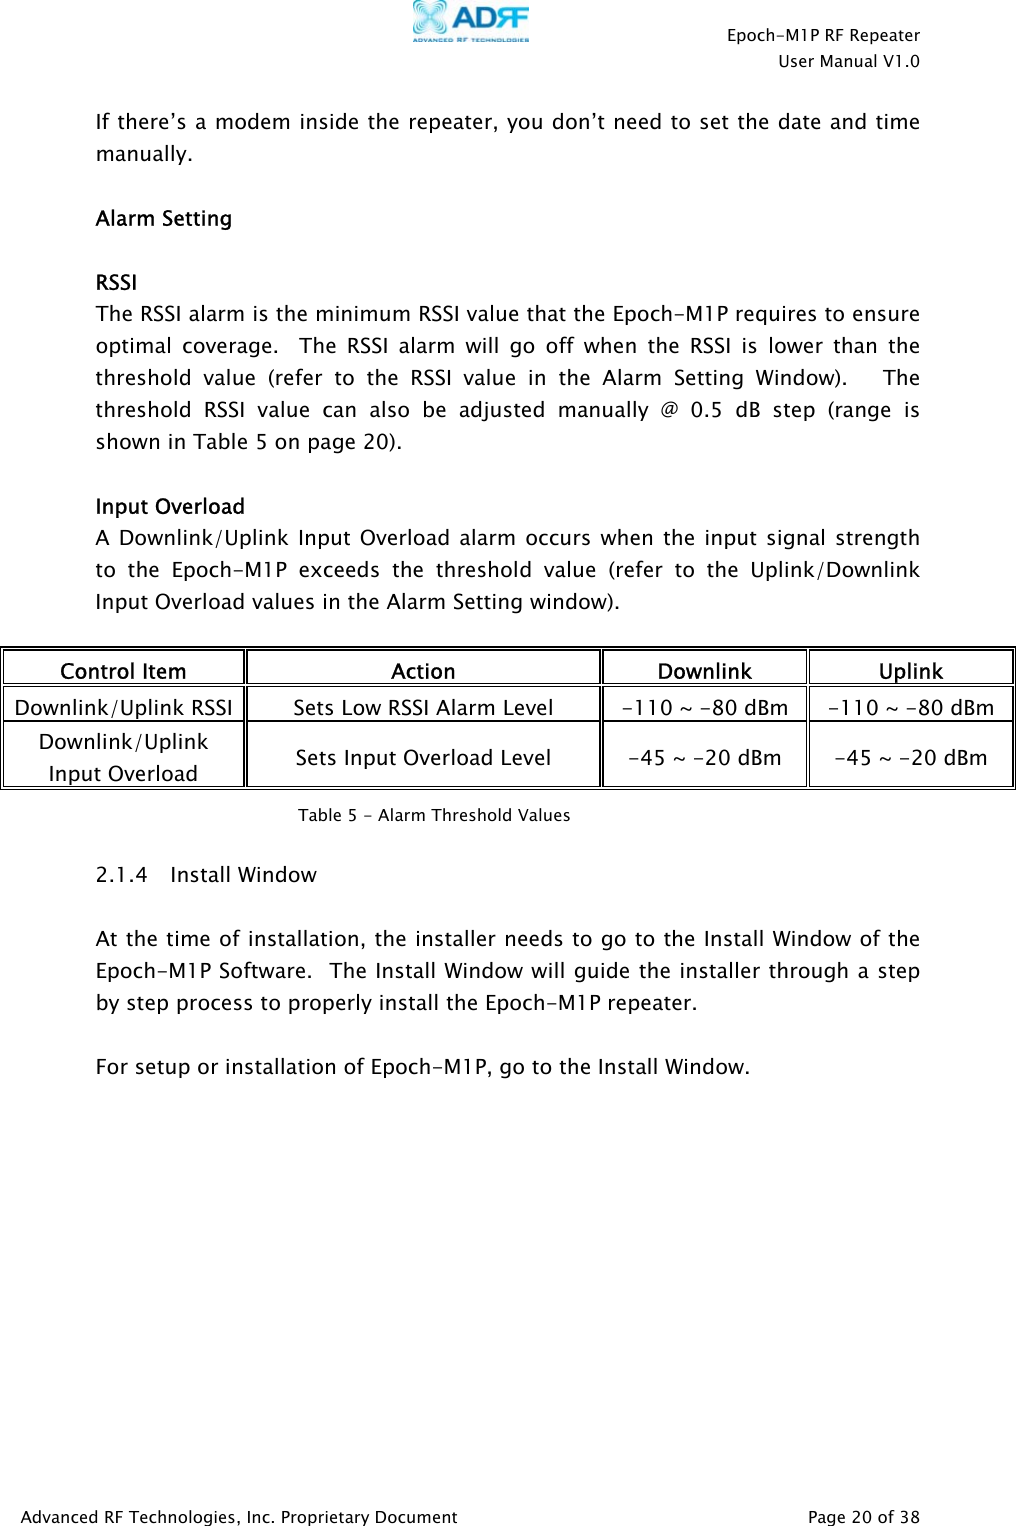    Epoch-M1P RF Repeater  User Manual V1.0  If there’s a modem inside the repeater, you don’t need to set the date and time manually.   Alarm Setting  RSSI The RSSI alarm is the minimum RSSI value that the Epoch-M1P requires to ensure optimal coverage.  The RSSI alarm will go off when the RSSI is lower than the threshold value (refer to the RSSI value in the Alarm Setting Window).   The threshold RSSI value can also be adjusted manually @ 0.5 dB step (range is shown in Table 5 on page 20).   Input Overload A Downlink/Uplink Input Overload alarm occurs when the input signal strength to the Epoch-M1P exceeds the threshold value (refer to the Uplink/Downlink Input Overload values in the Alarm Setting window).  Control Item  Action Downlink Uplink Downlink/Uplink RSSI  Sets Low RSSI Alarm Level  -110 ~ -80 dBm  -110 ~ -80 dBm Downlink/Uplink Input Overload  Sets Input Overload Level  -45 ~ -20 dBm  -45 ~ -20 dBm  Table 5 - Alarm Threshold Values  2.1.4 Install Window   At the time of installation, the installer needs to go to the Install Window of the Epoch-M1P Software.  The Install Window will guide the installer through a step by step process to properly install the Epoch-M1P repeater.   For setup or installation of Epoch-M1P, go to the Install Window.   Advanced RF Technologies, Inc. Proprietary Document   Page 20 of 38  